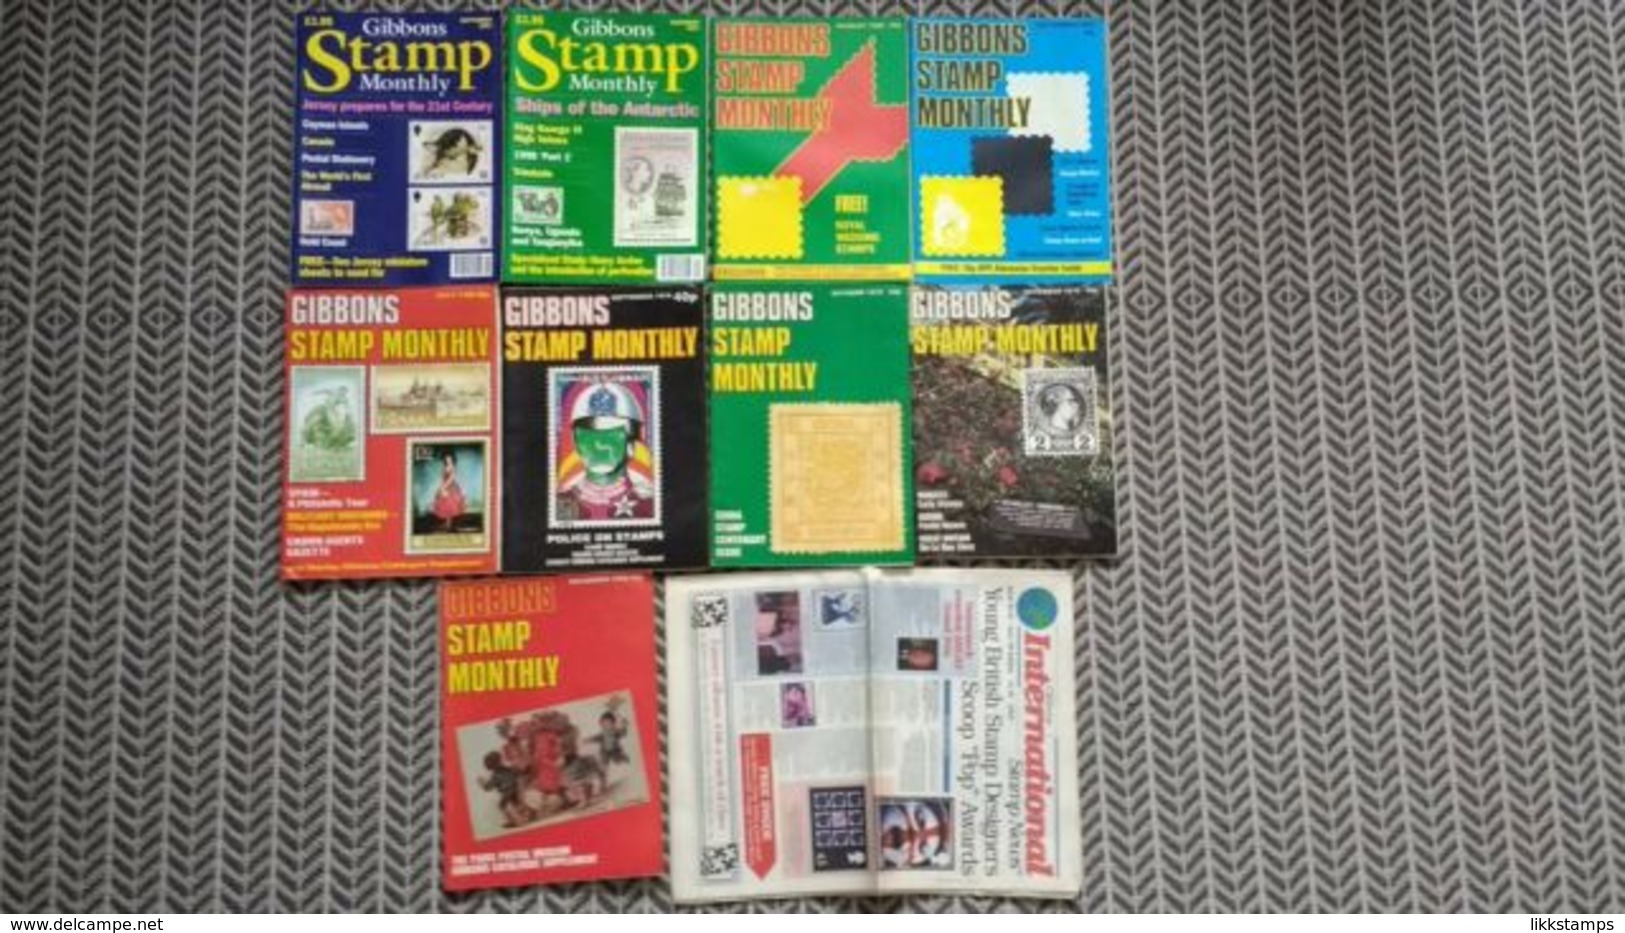 GIBBONS STAMP MONTHLY 1978/1980/1981/1997 VARIOUS ISSUES + 1 STAMP NEWS #L0009 (B6) - Englisch (ab 1941)